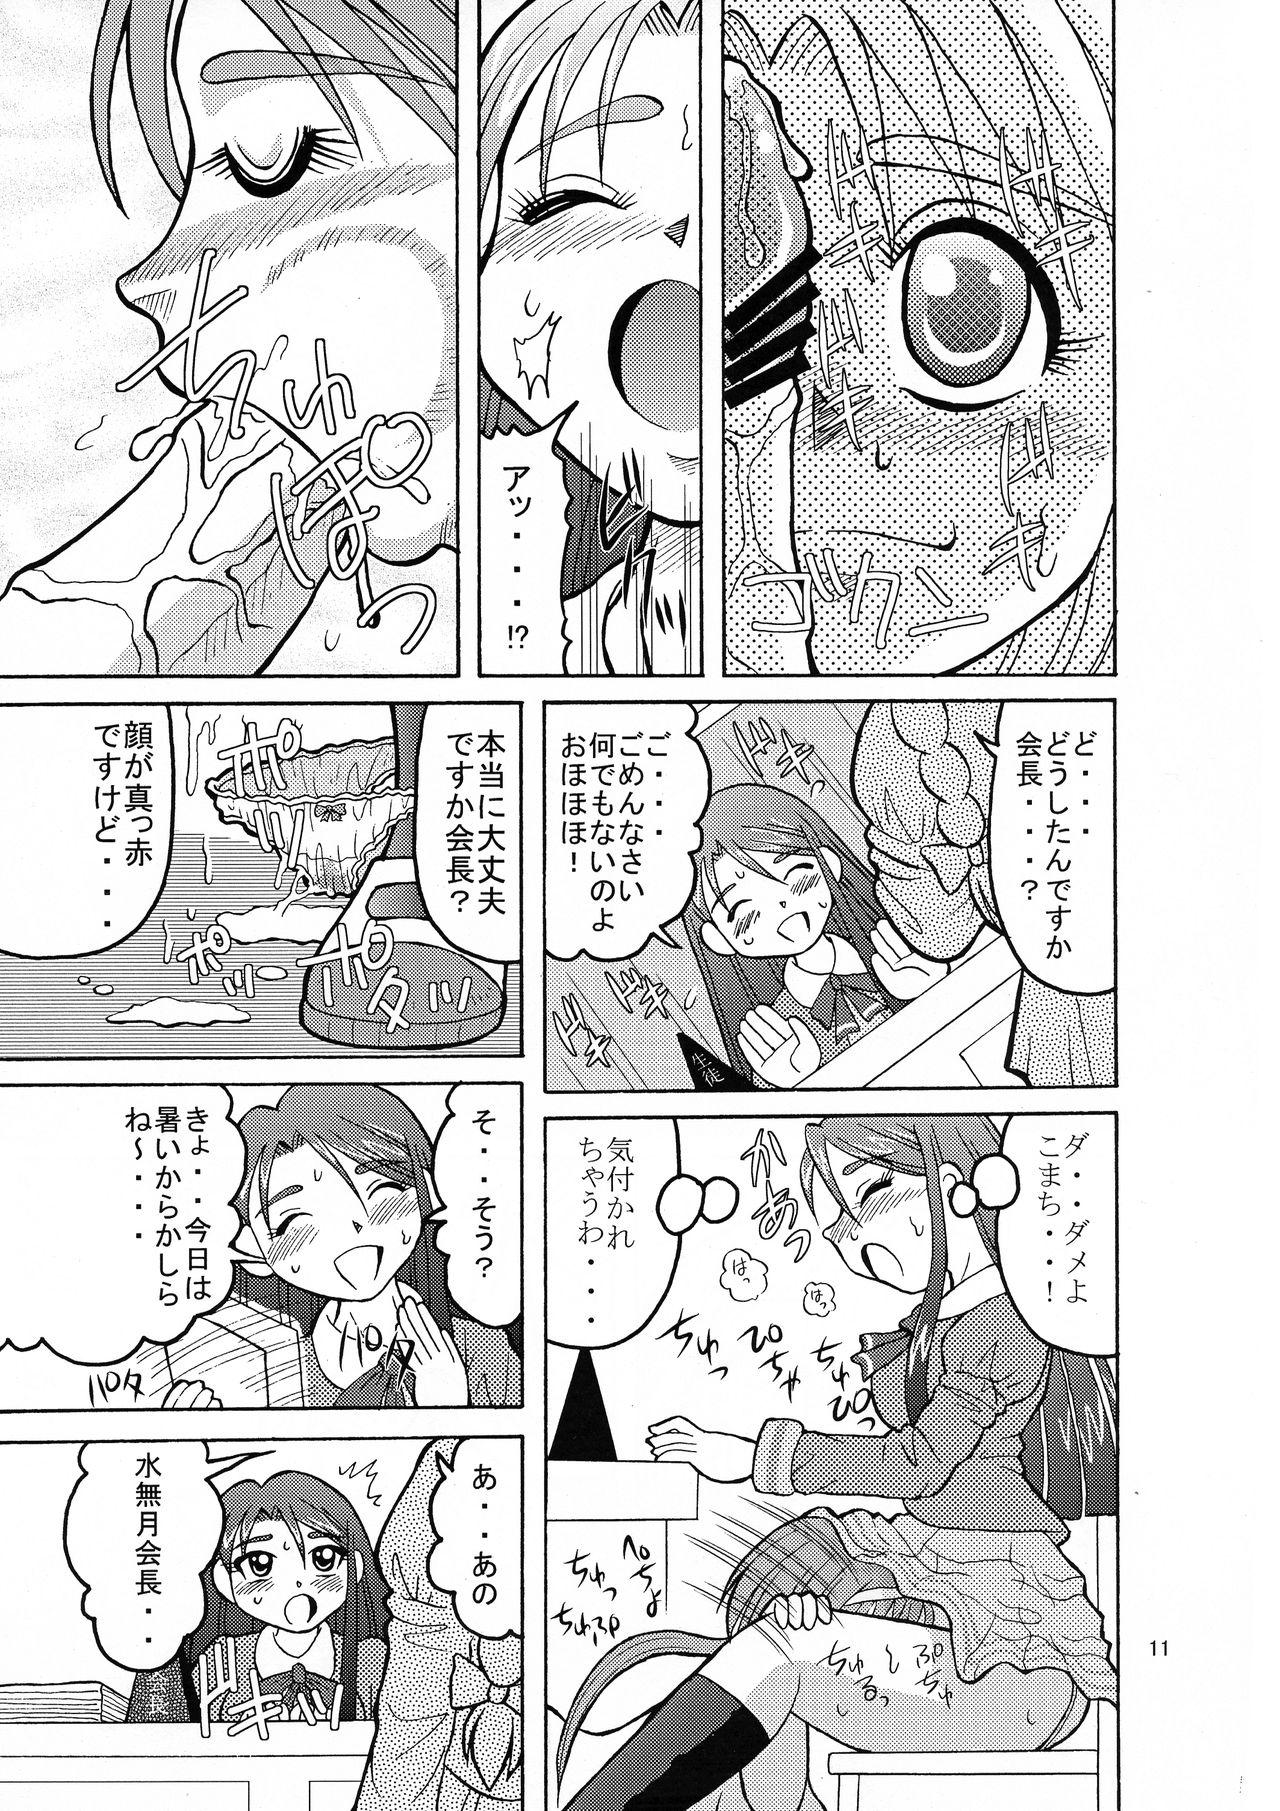 Food Komakare GO! GO! - Yes precure 5 Dick Sucking - Page 11